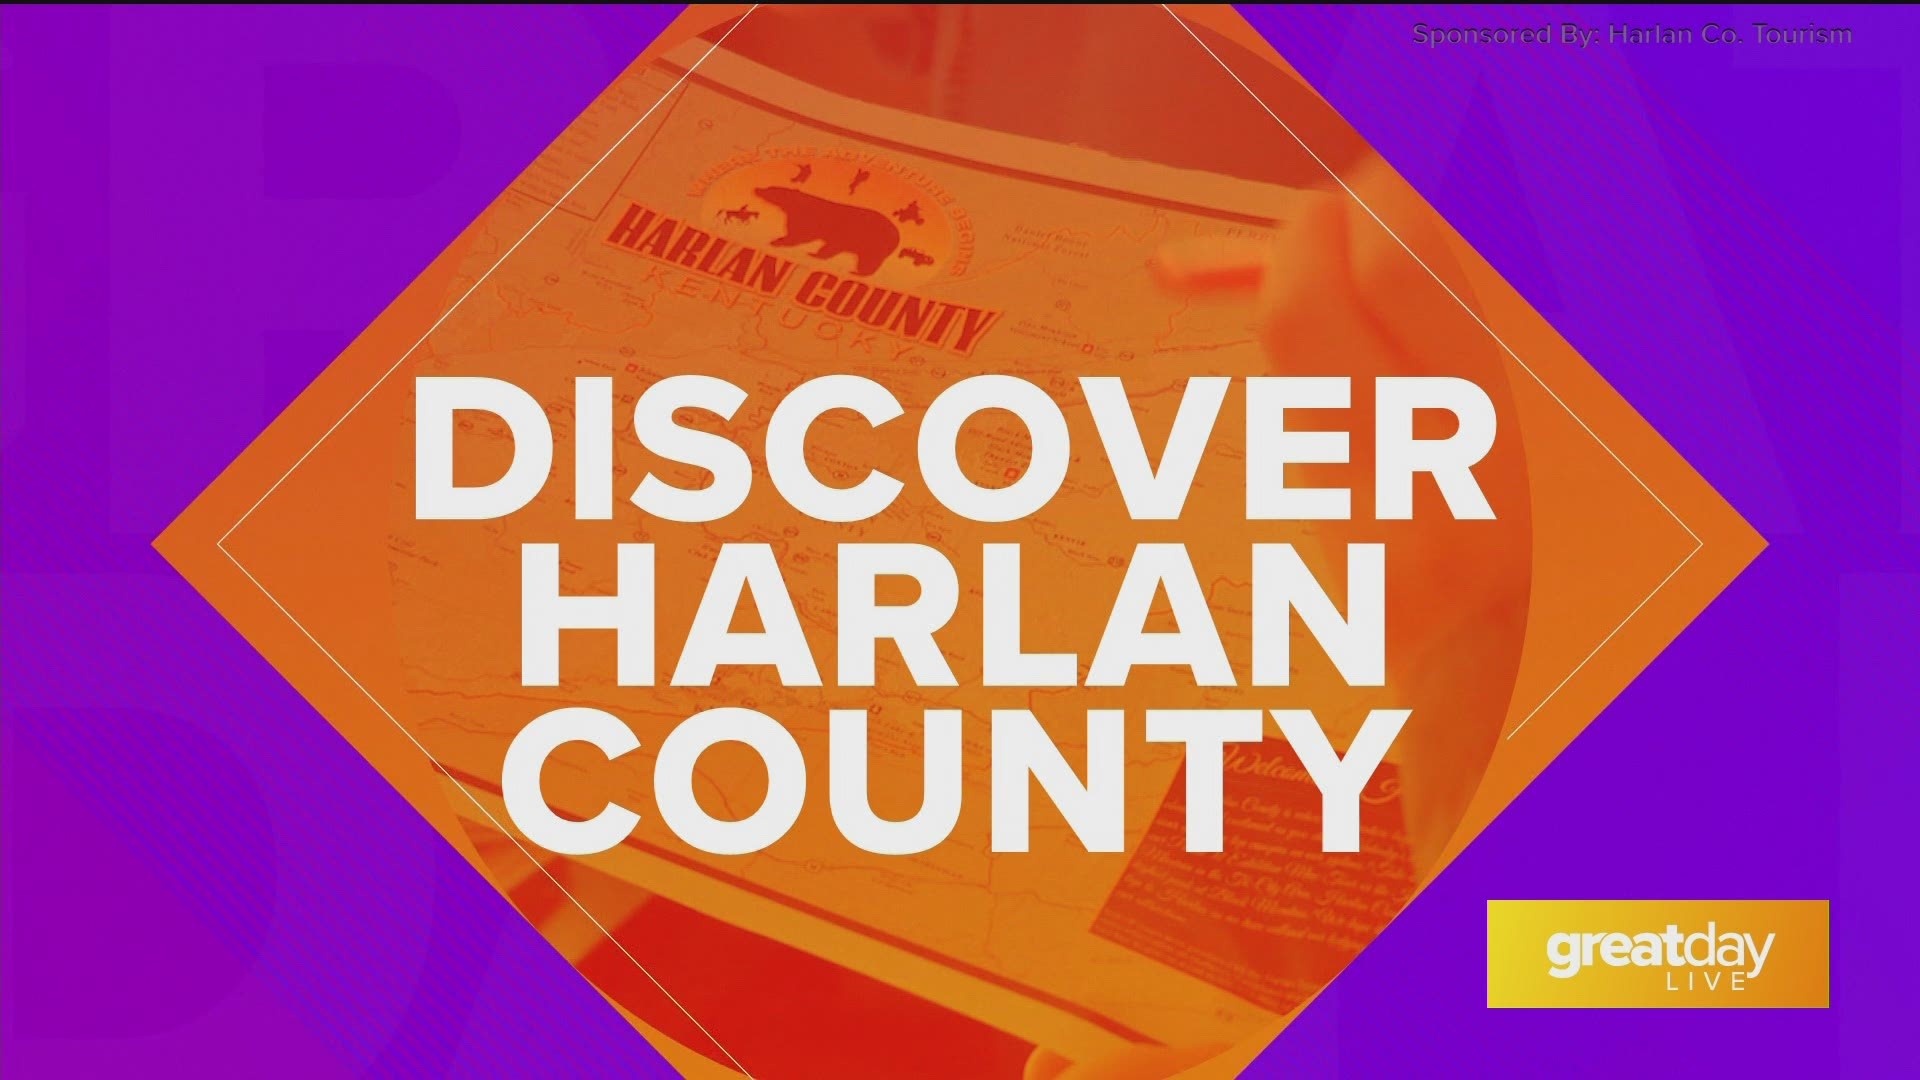 Discover Harlan County on Great Day Live